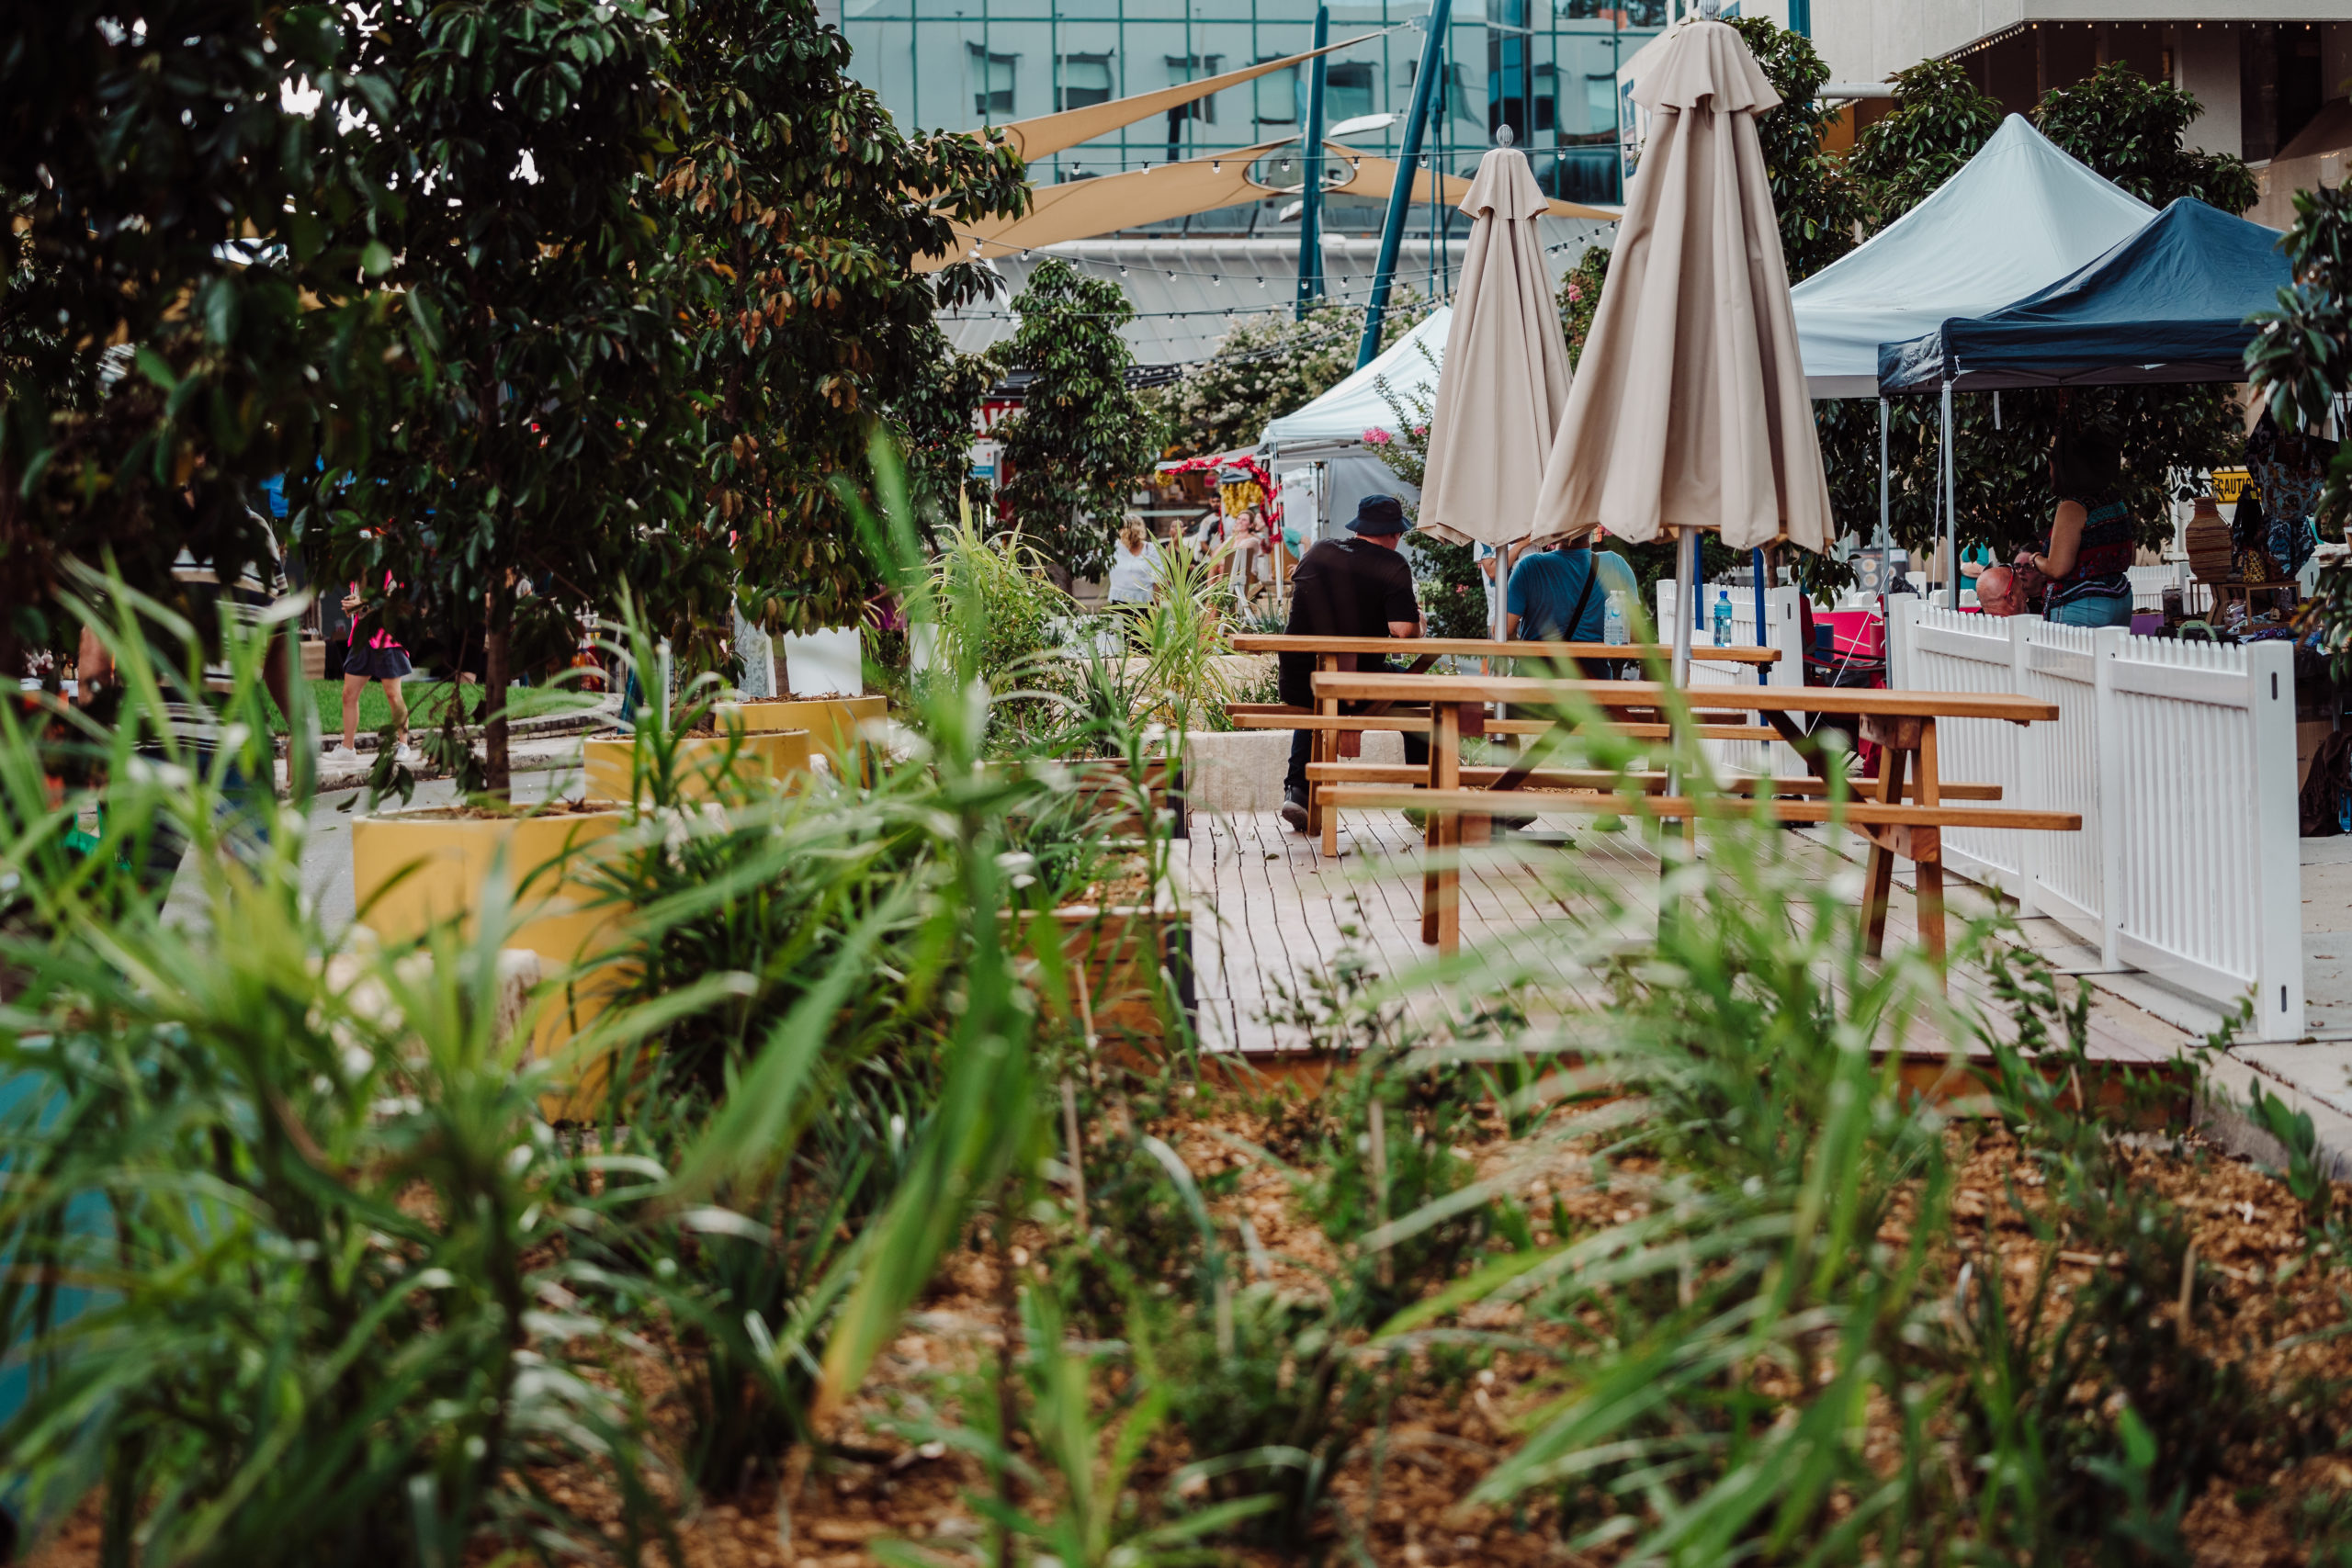 Reimagining Campbelltown: Measuring the impact of placemaking investment and activations